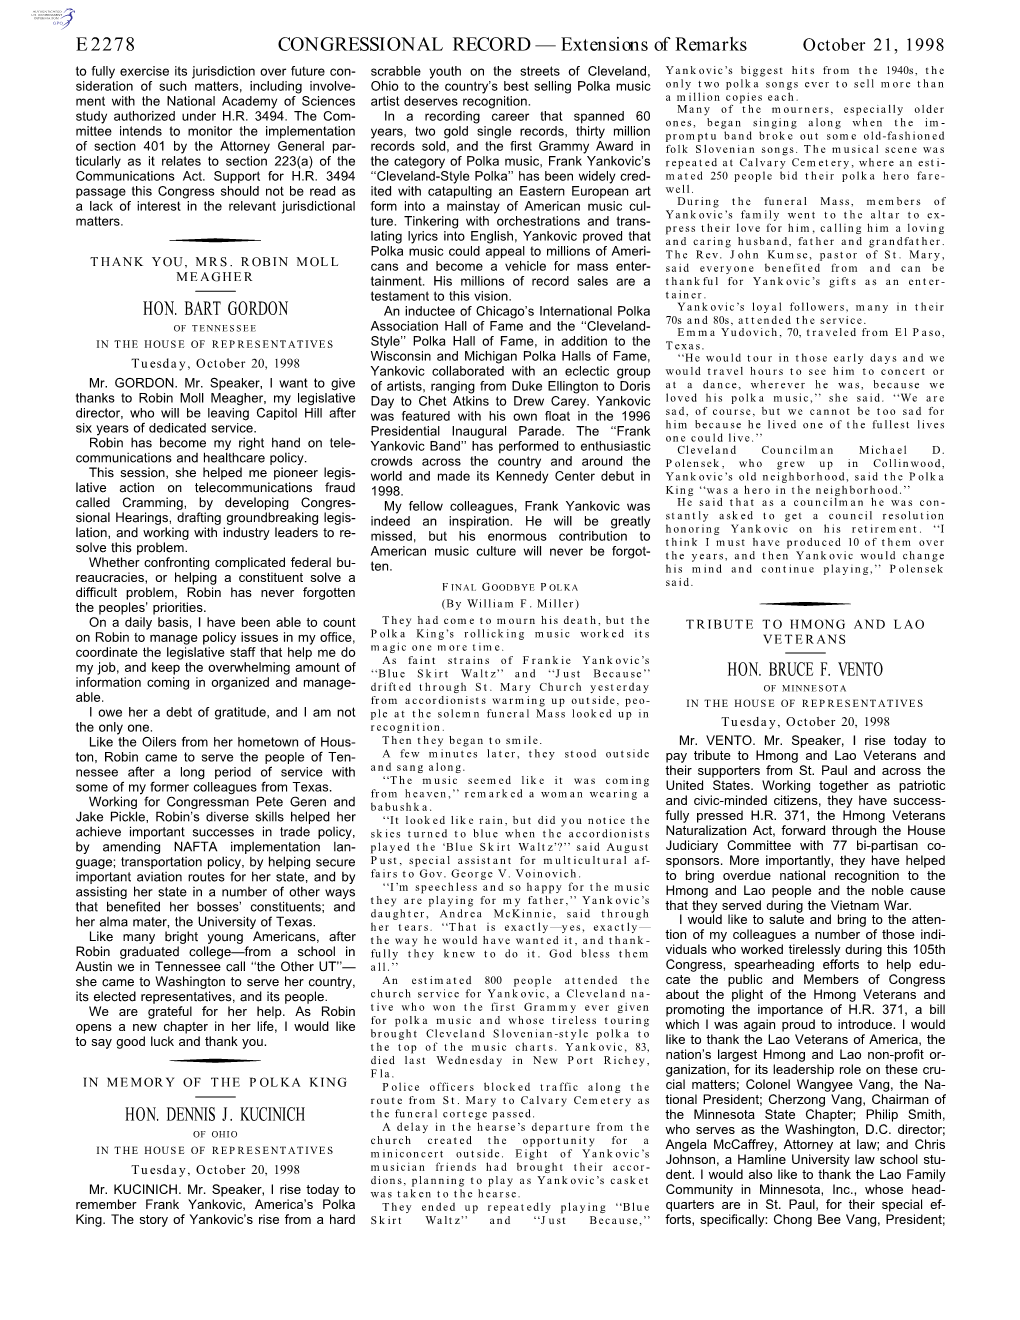 CONGRESSIONAL RECORD— Extensions of Remarks E2278 HON